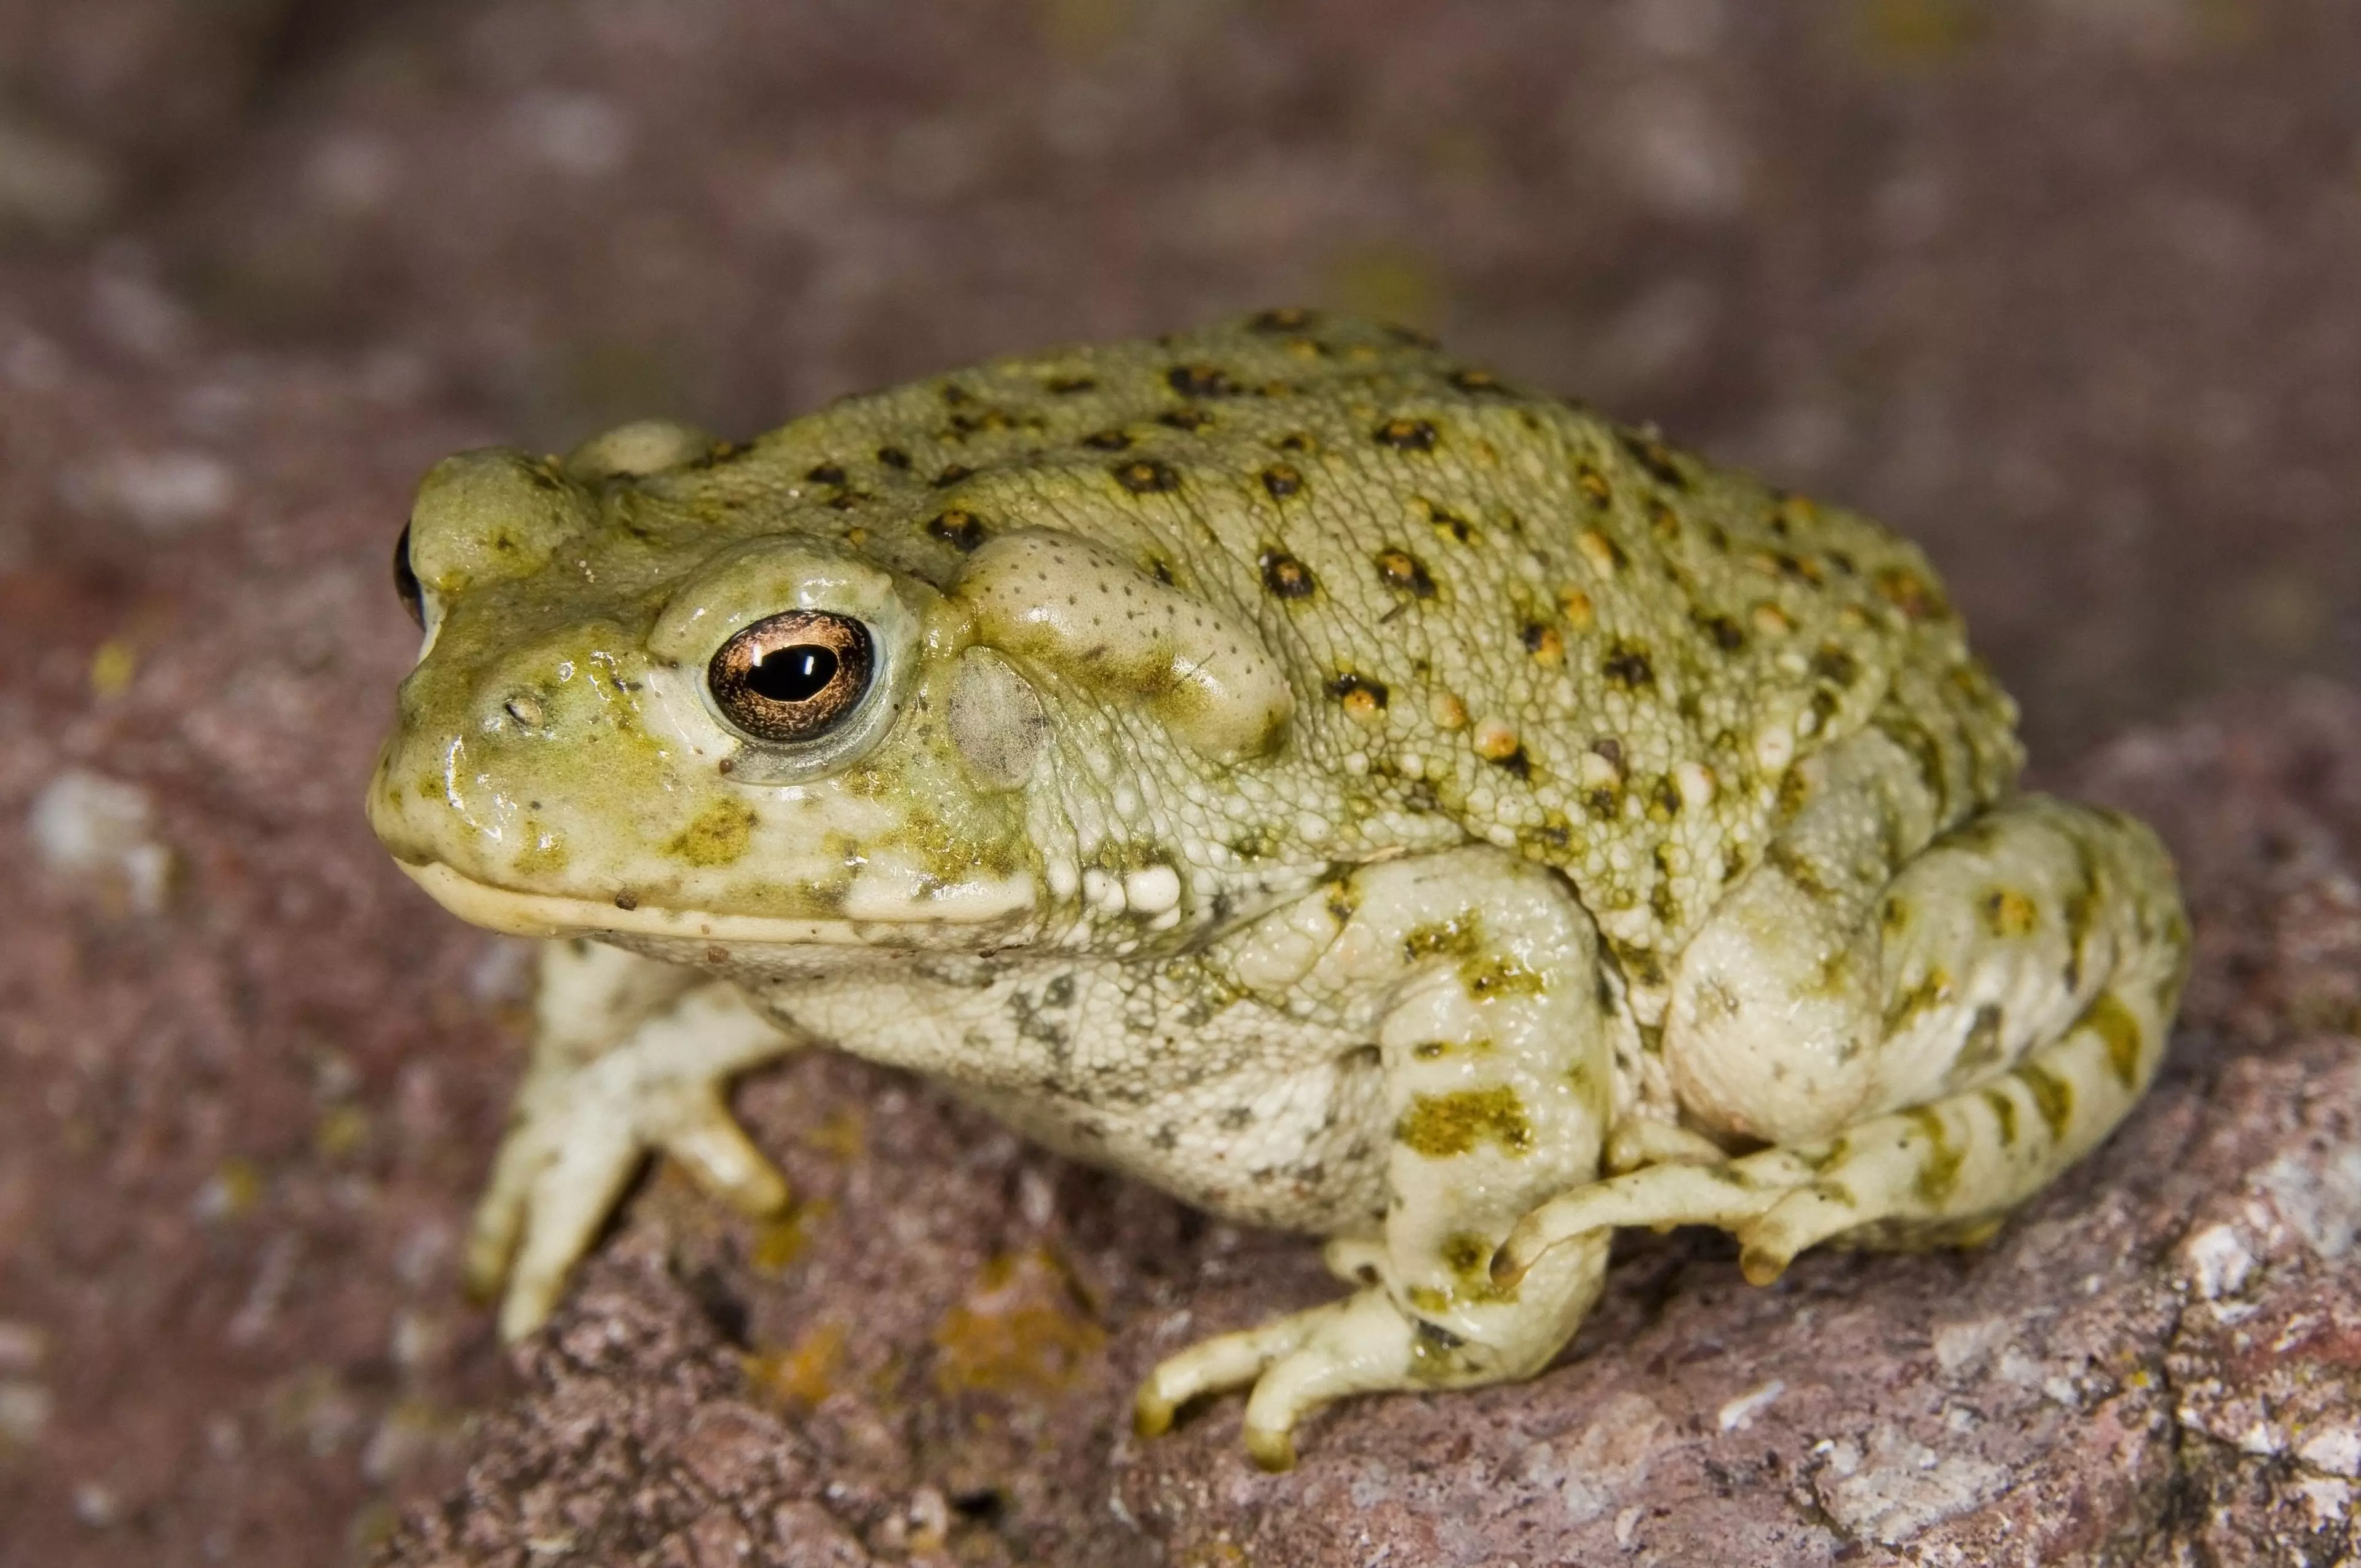 Porn Star Held By Police After Man Dies From Inhaling Poisonous Toad Fumes